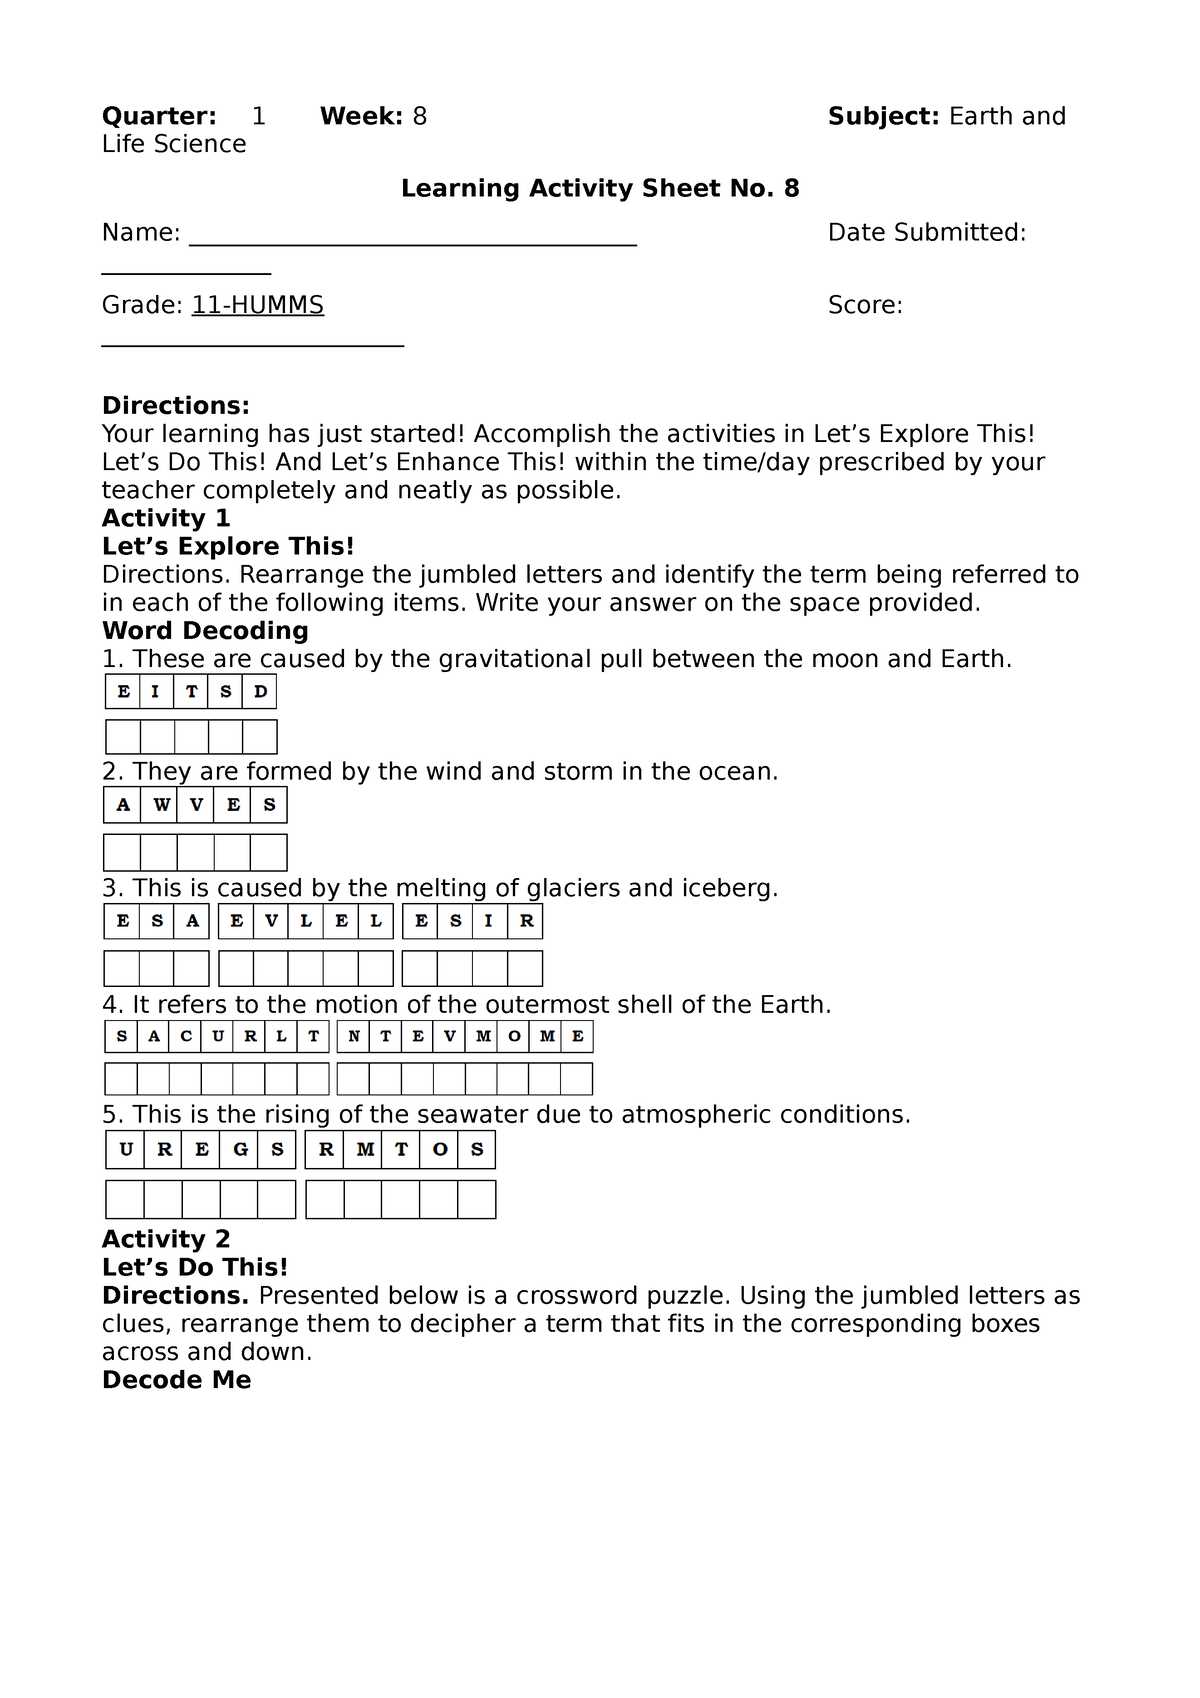 Learning Activity Sheet No 8 Els Quarter 1 Week 8 Subject Earth And Life Science Learning 1832